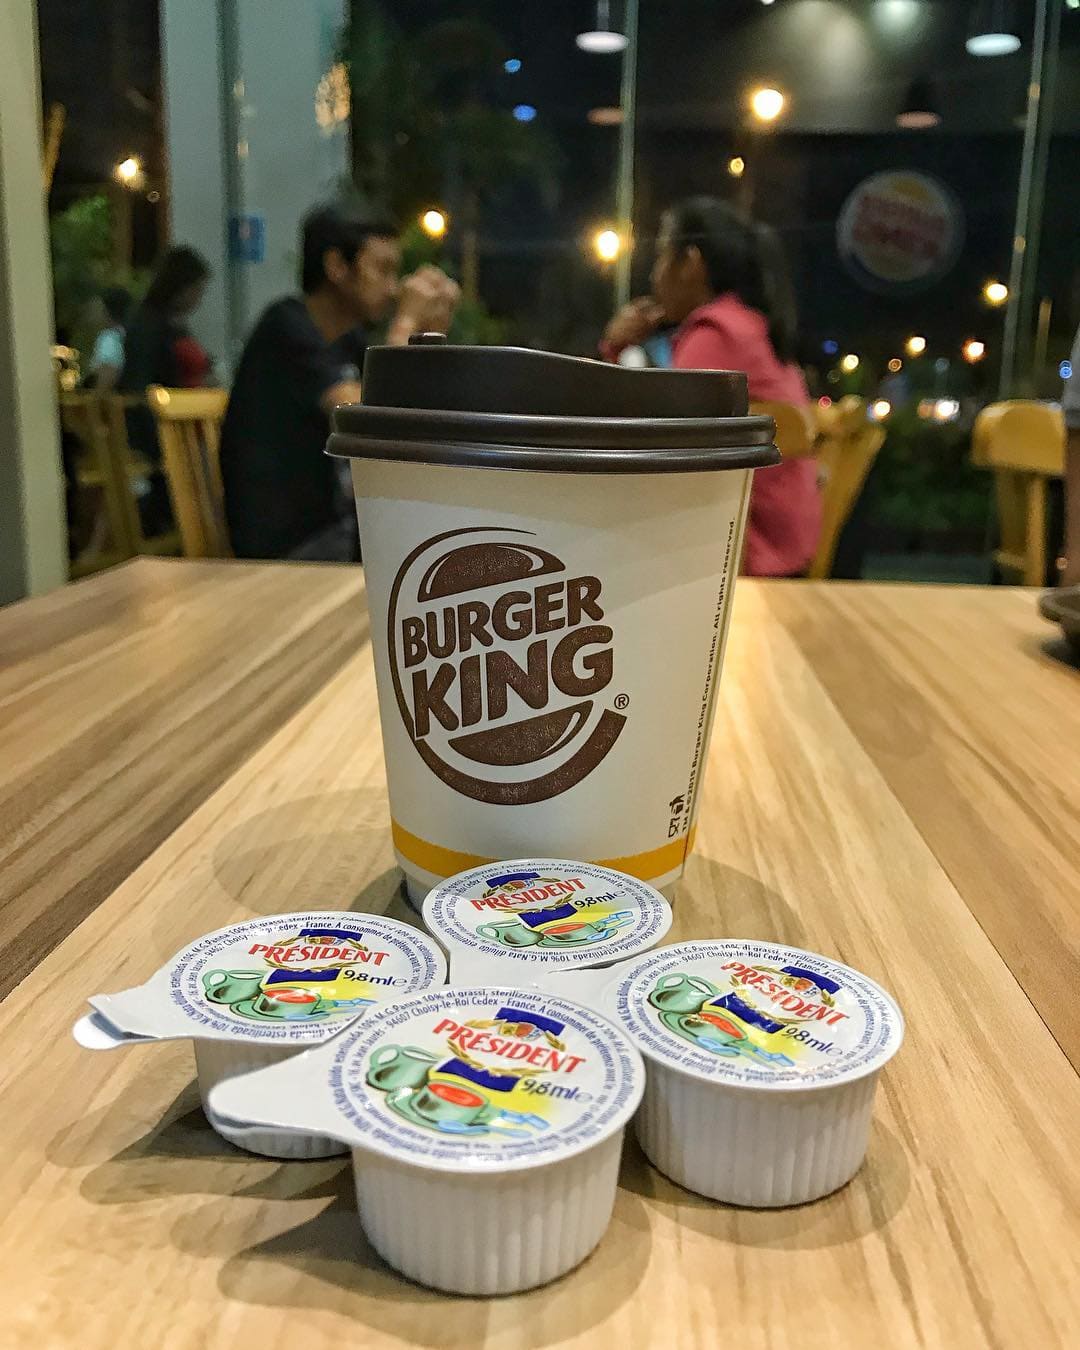 How much cream and sugar to put in Burger King coffee